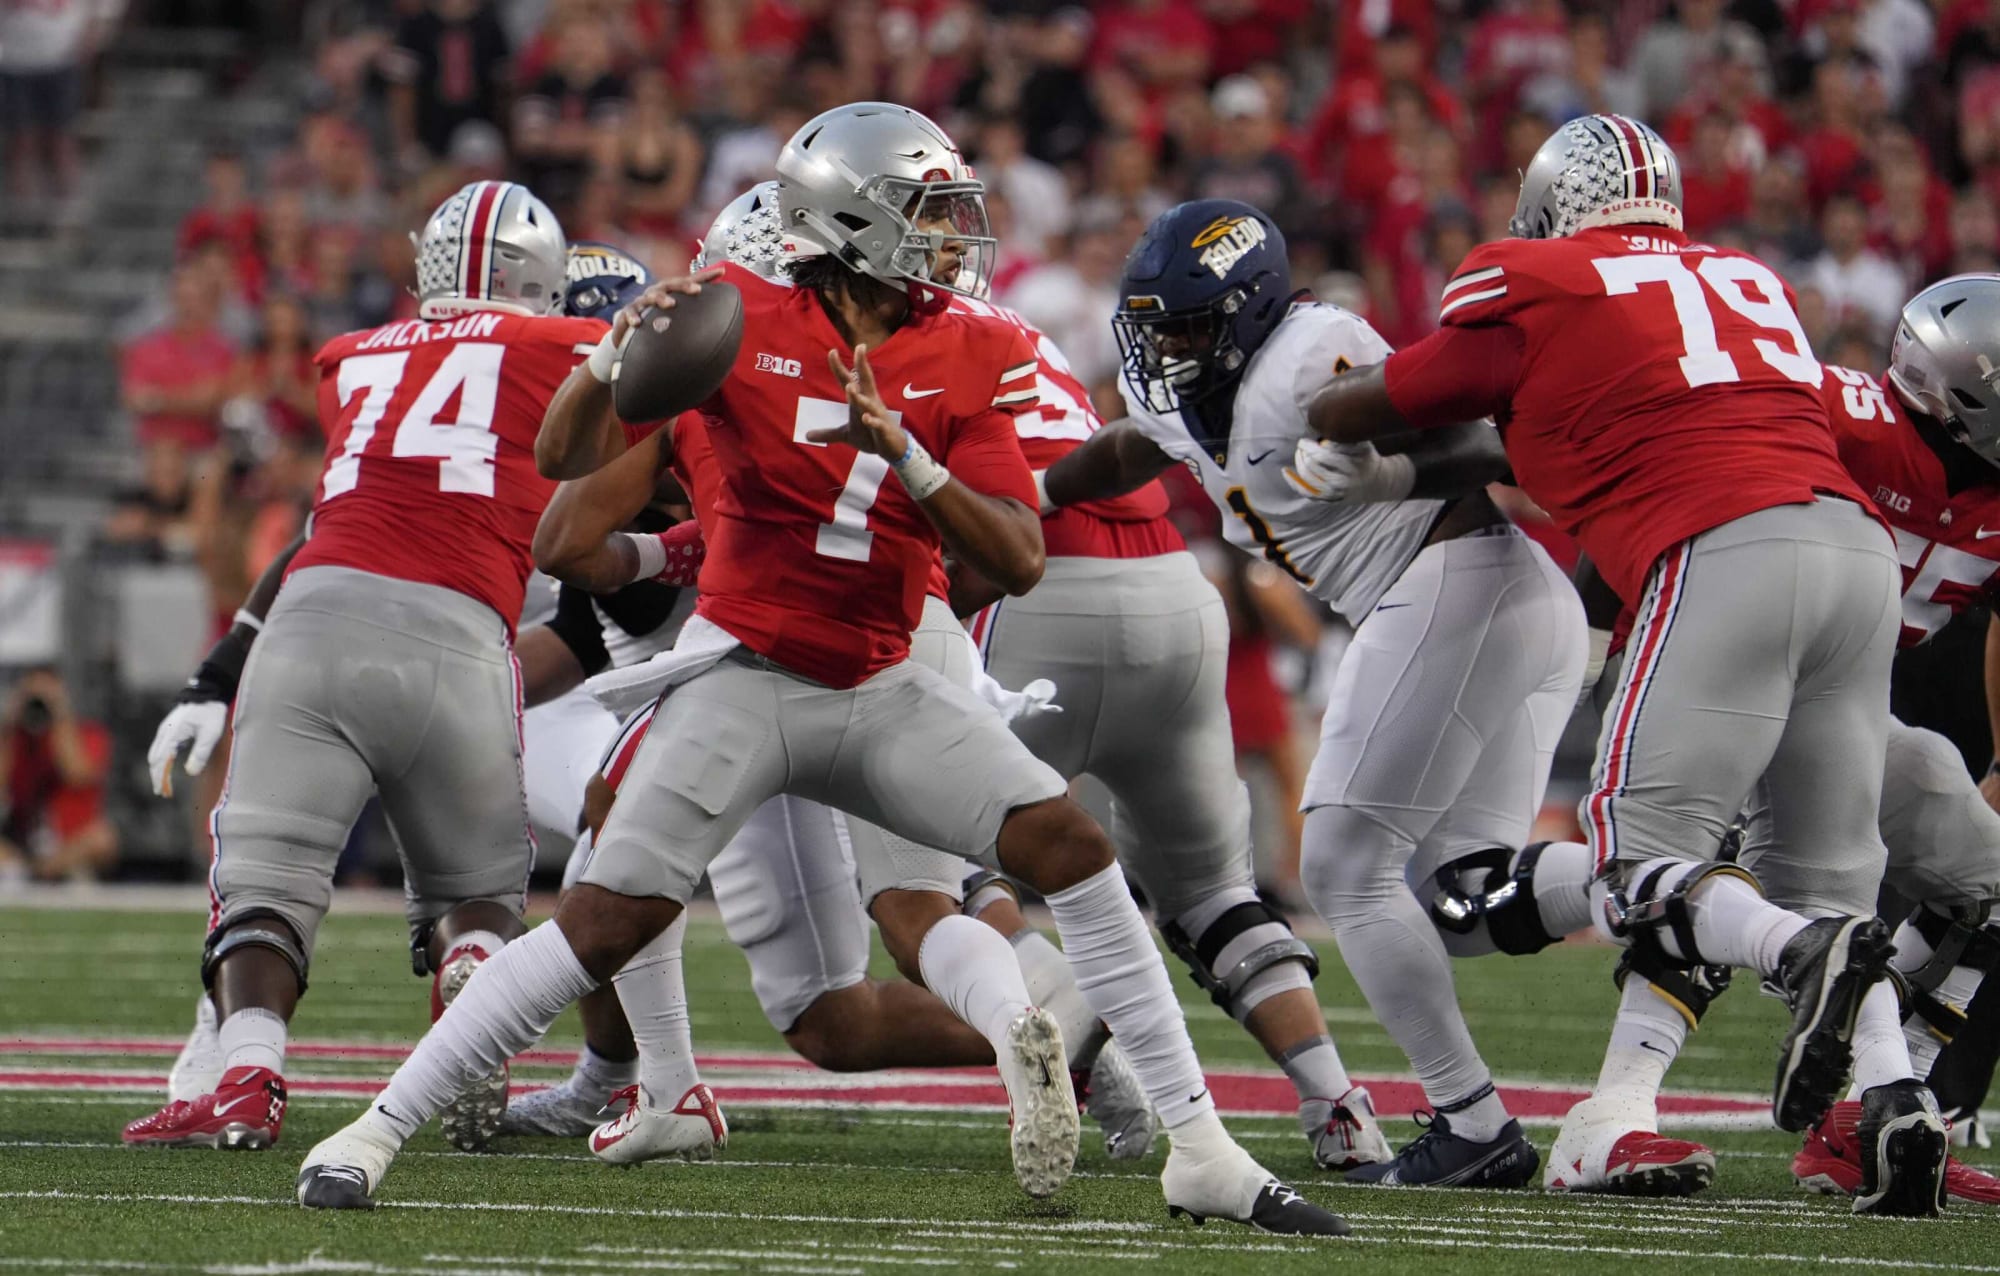 Ohio State football vs. Wisconsin: Best bets for Week 4